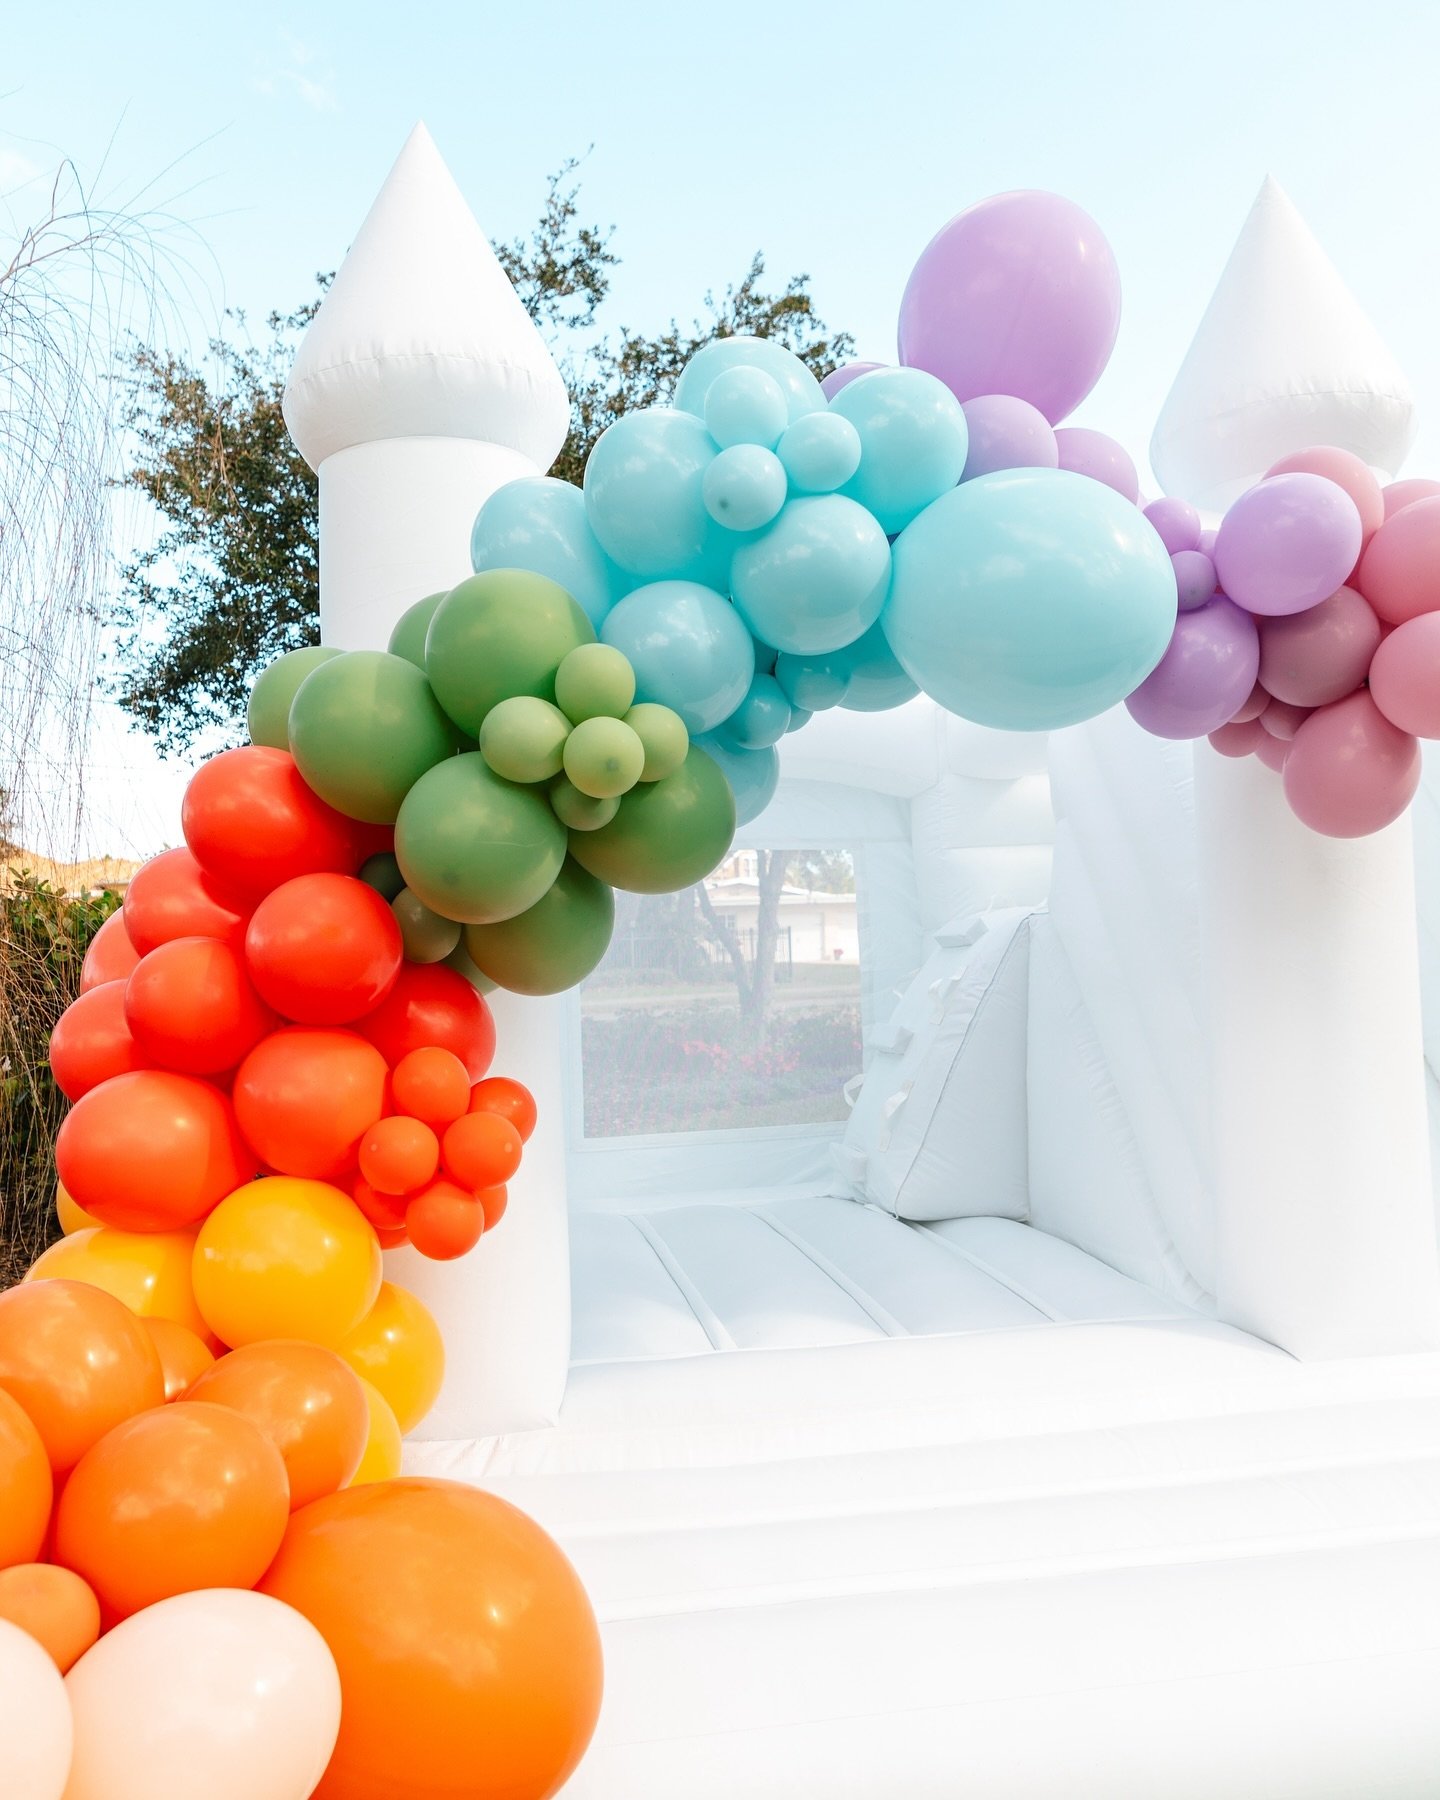 Adding a little color to your feed on the Friday Eve 🥳✨ this has been our favorite balloon garland color combo so far, and it accented our white bounce house perfectly 😍